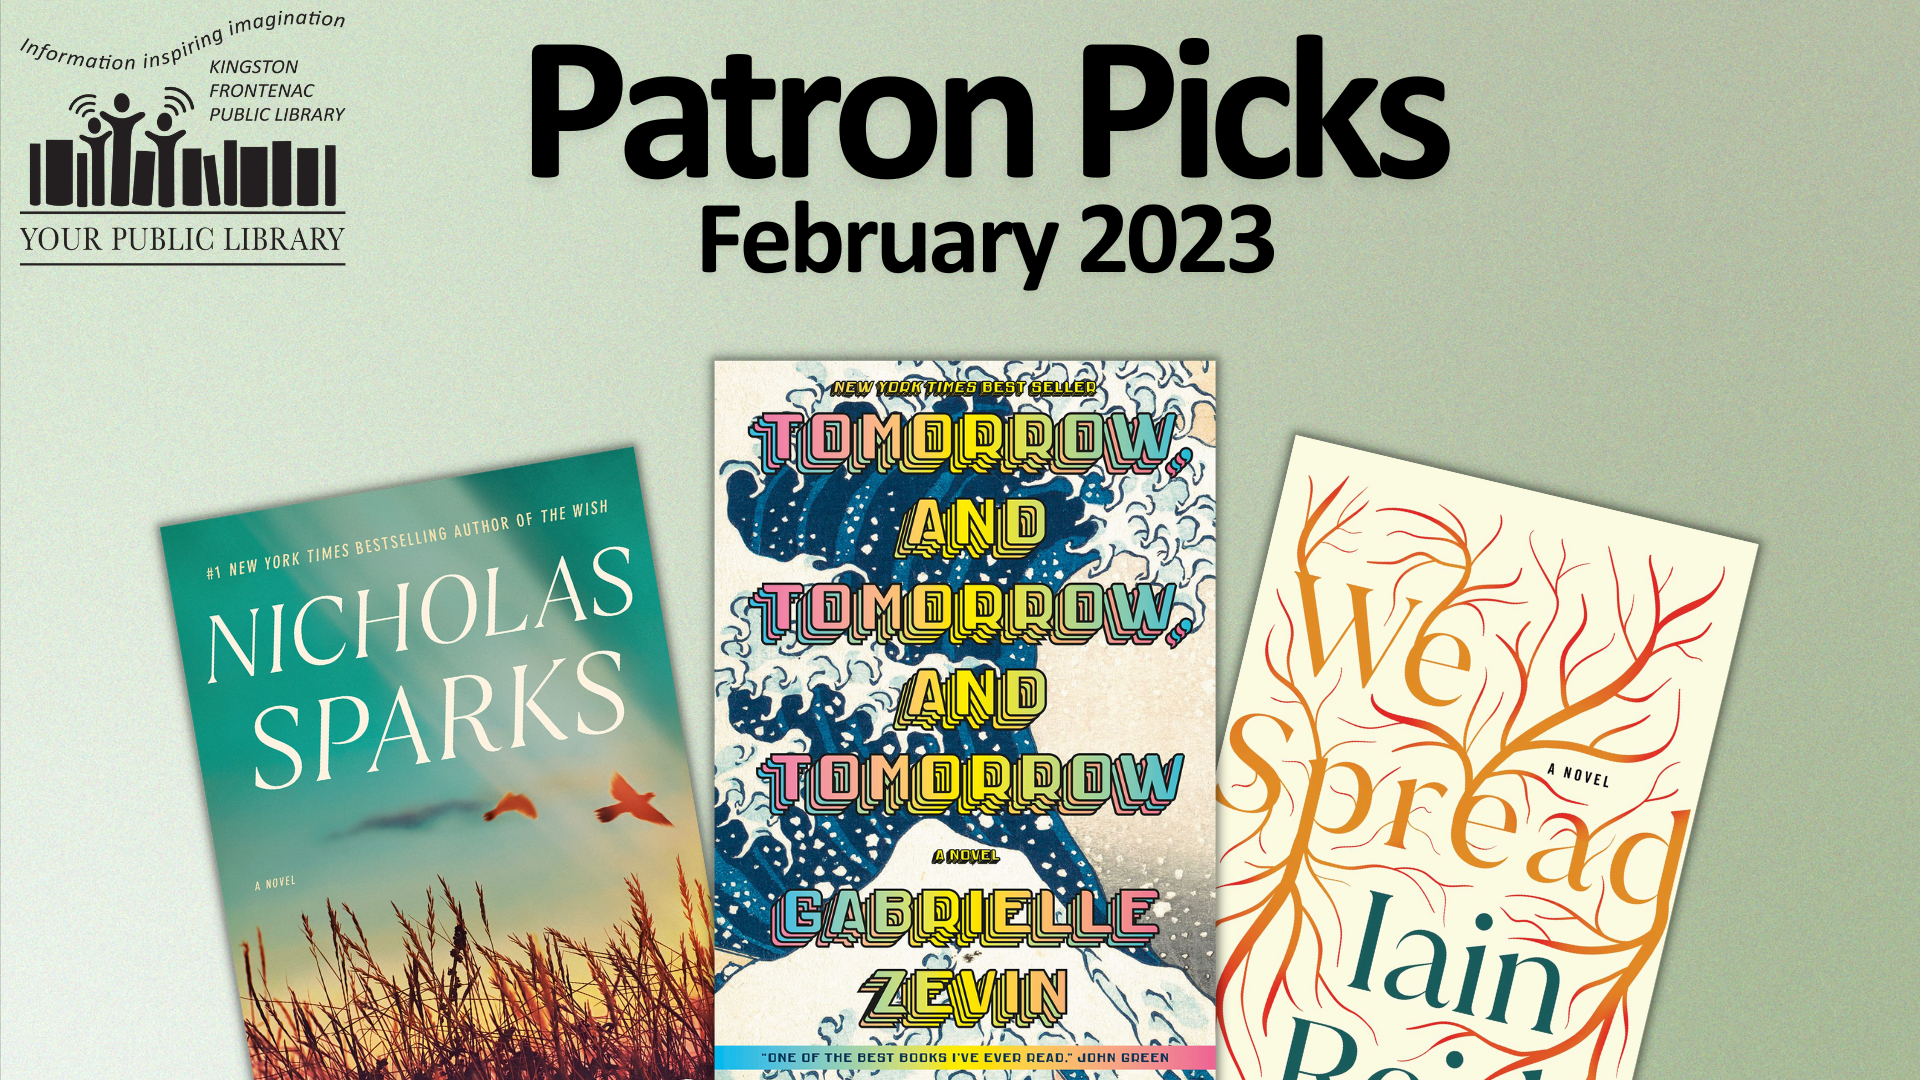 A collection of book covers with text reading Patron Picks - February 2023